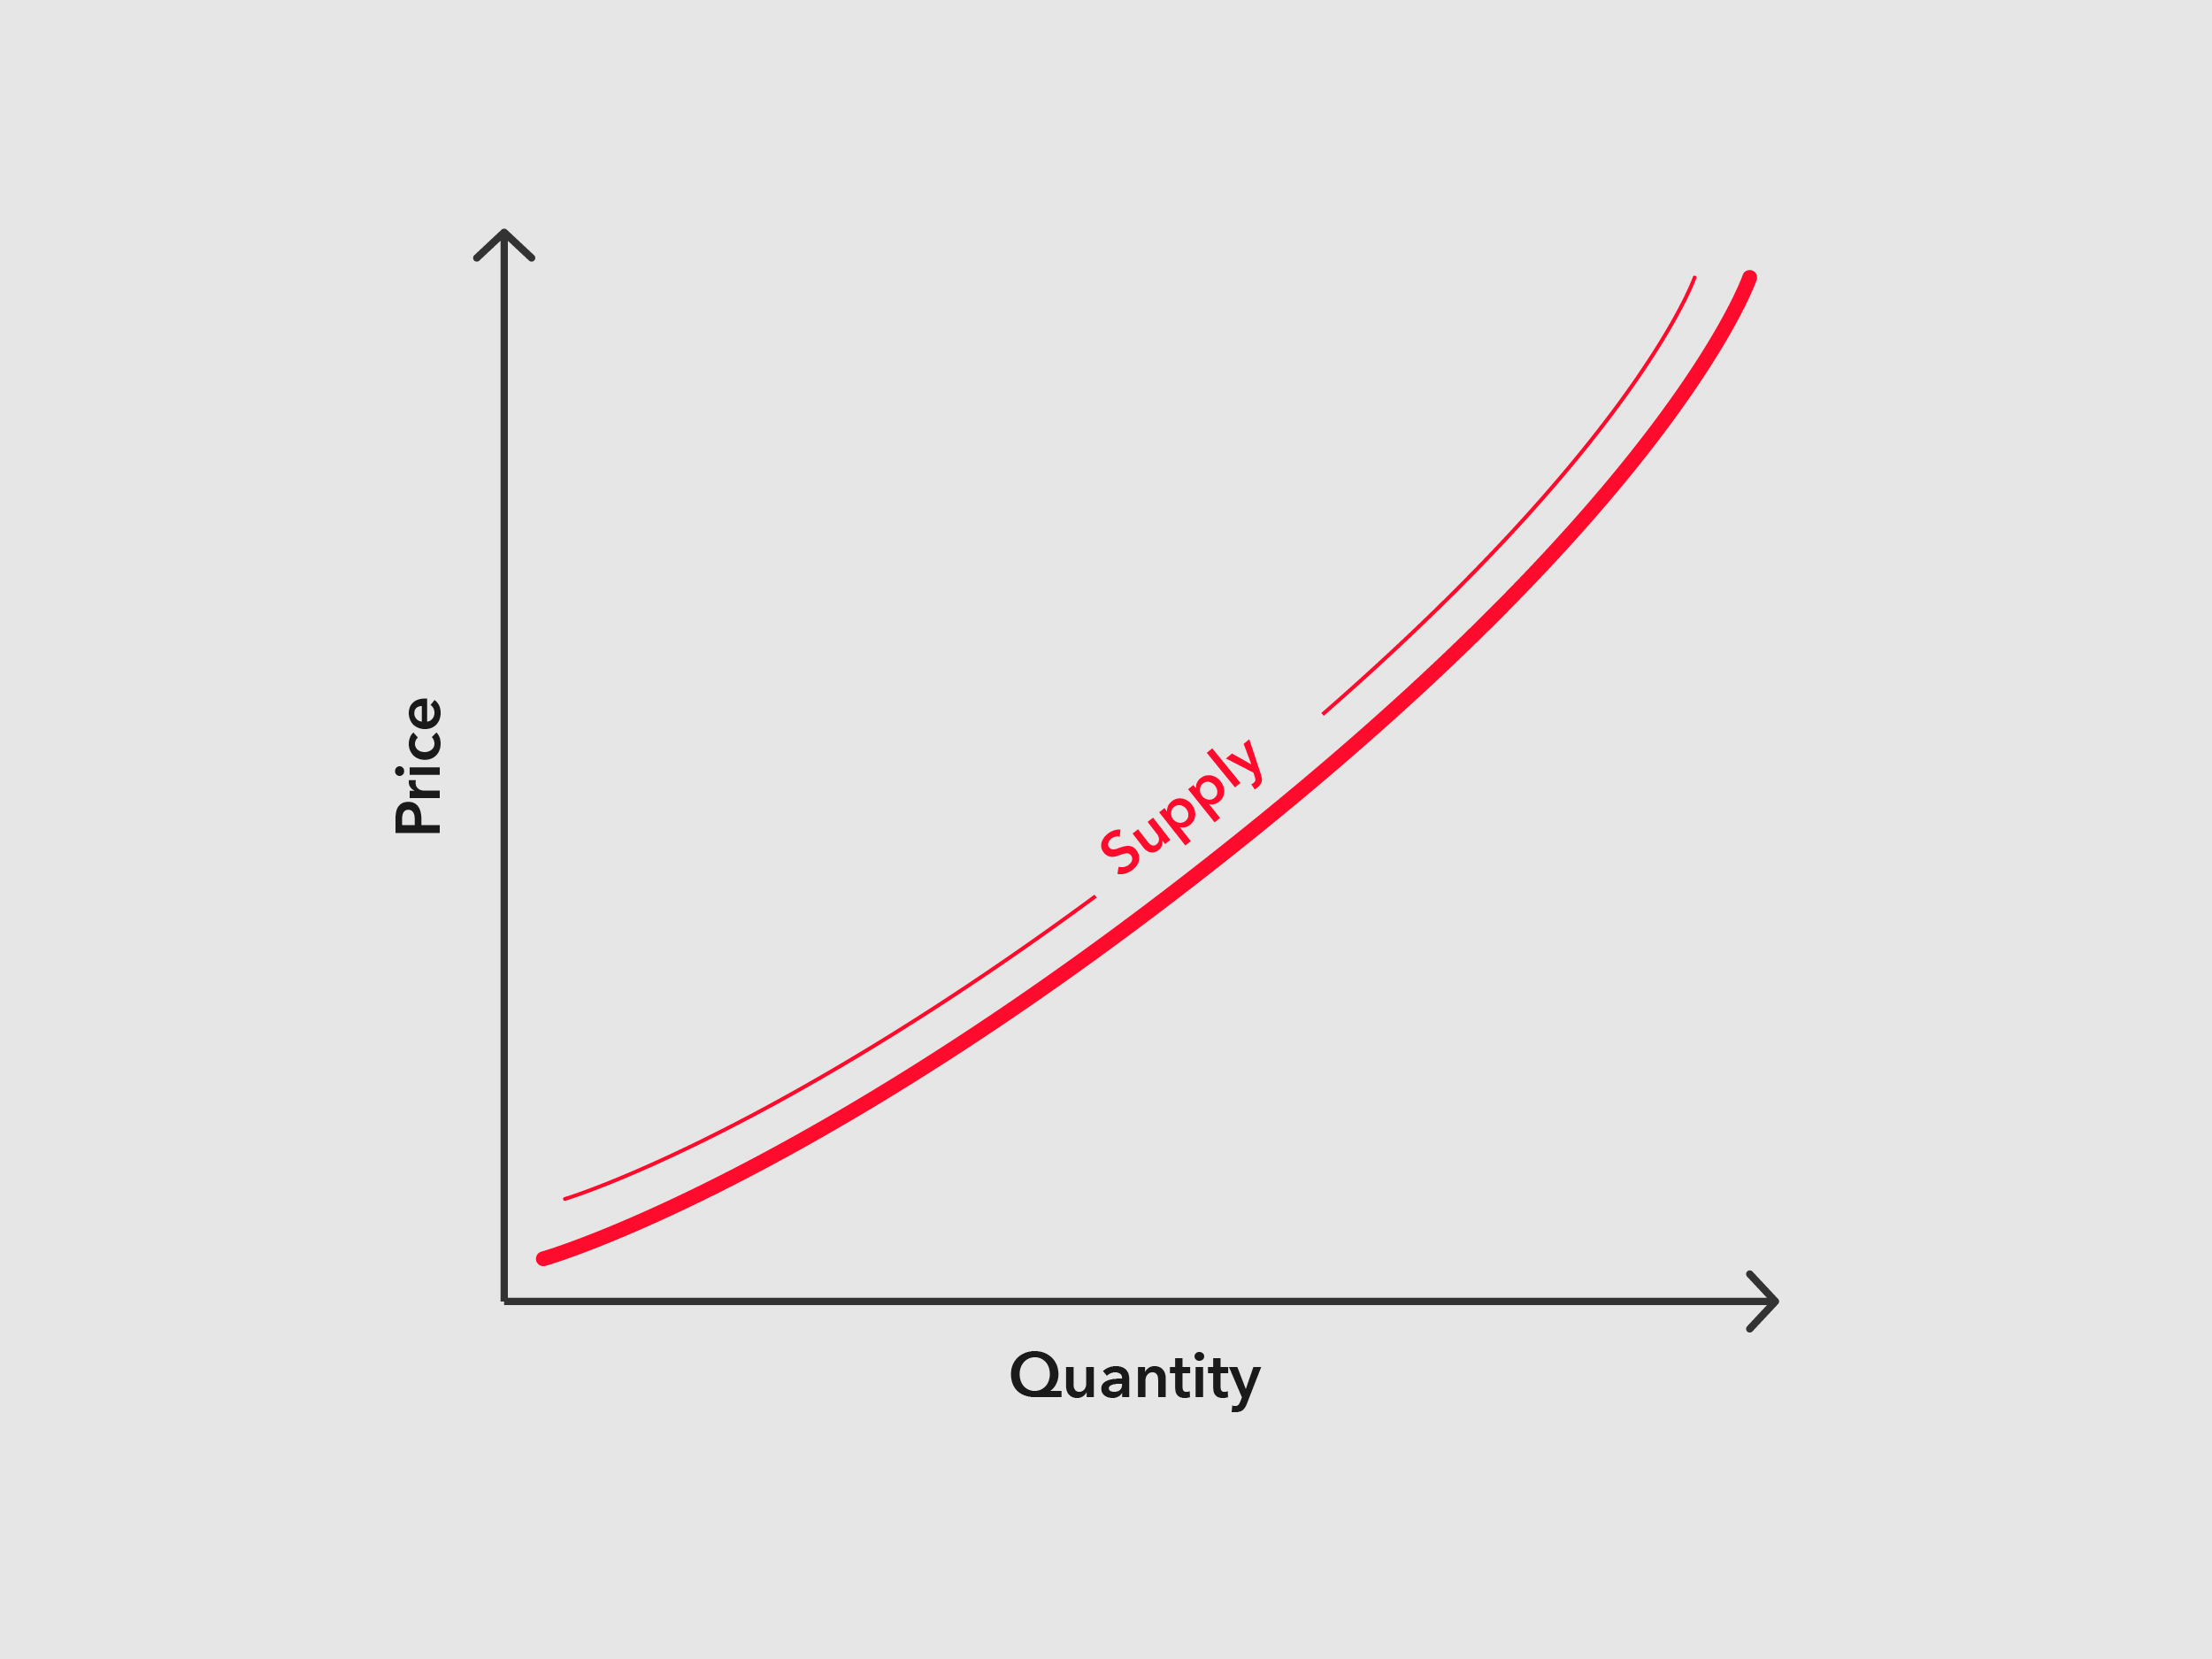 Graph of the relationship between price and quantity as it relates to supply.